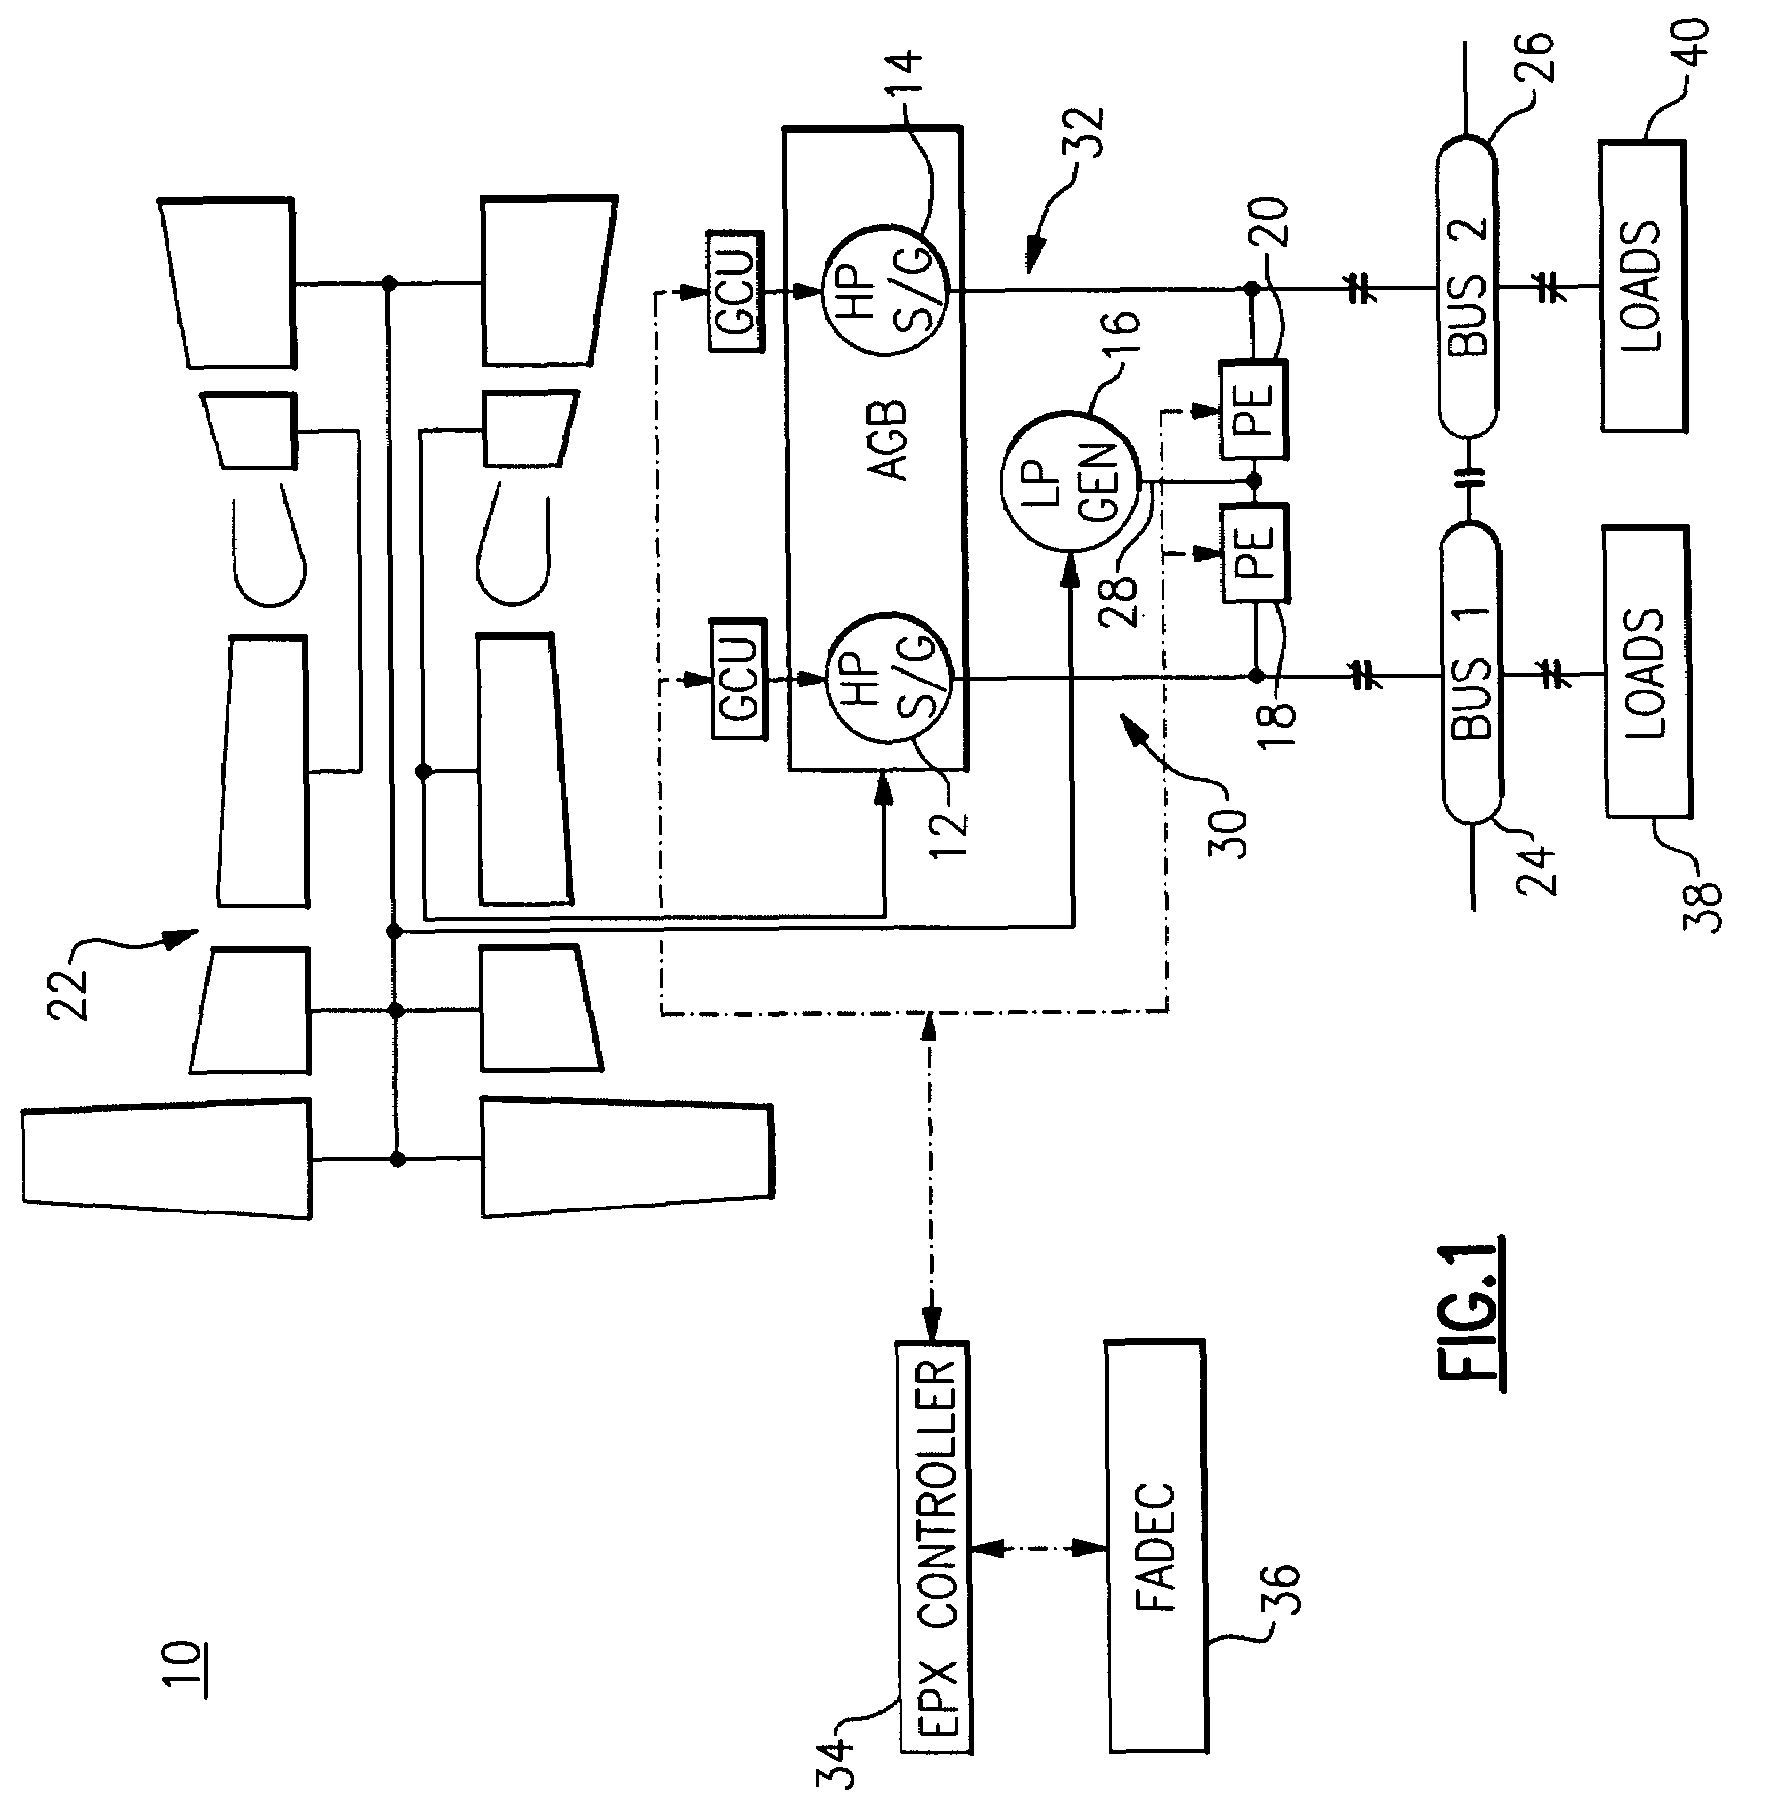 Integrated electrical power extraction for aircraft engines